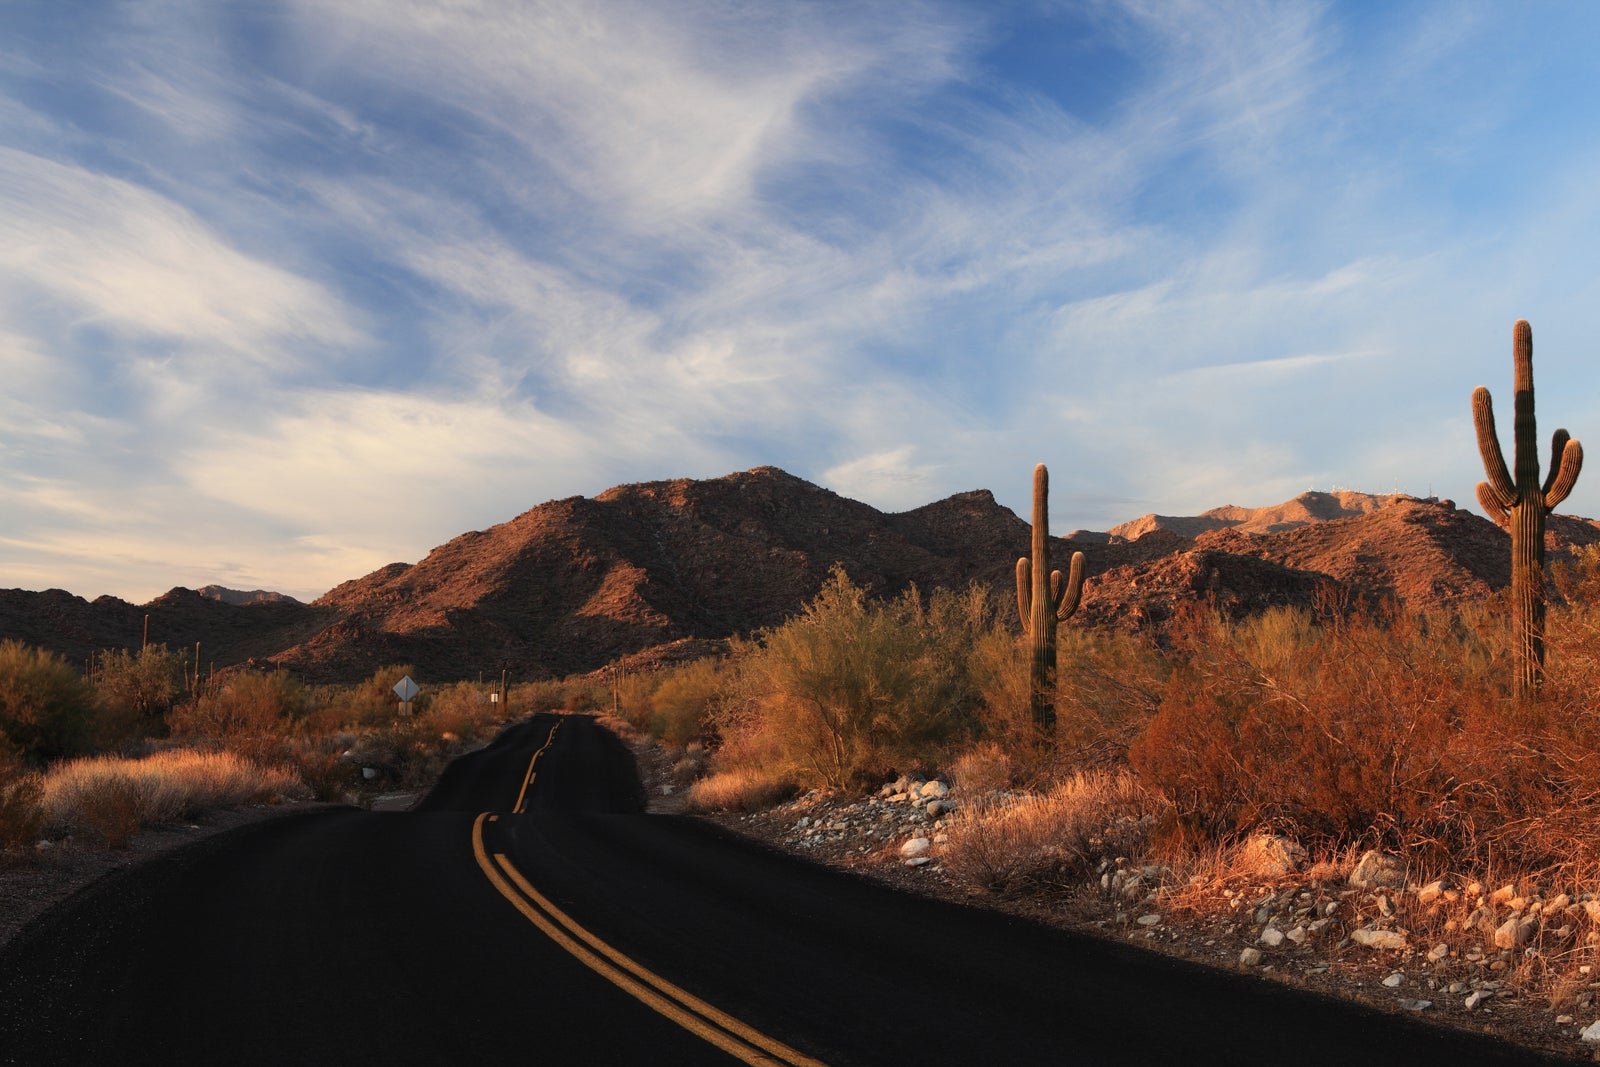 Road tripping from Phoenix? Here are 6 destinations to set your sights on